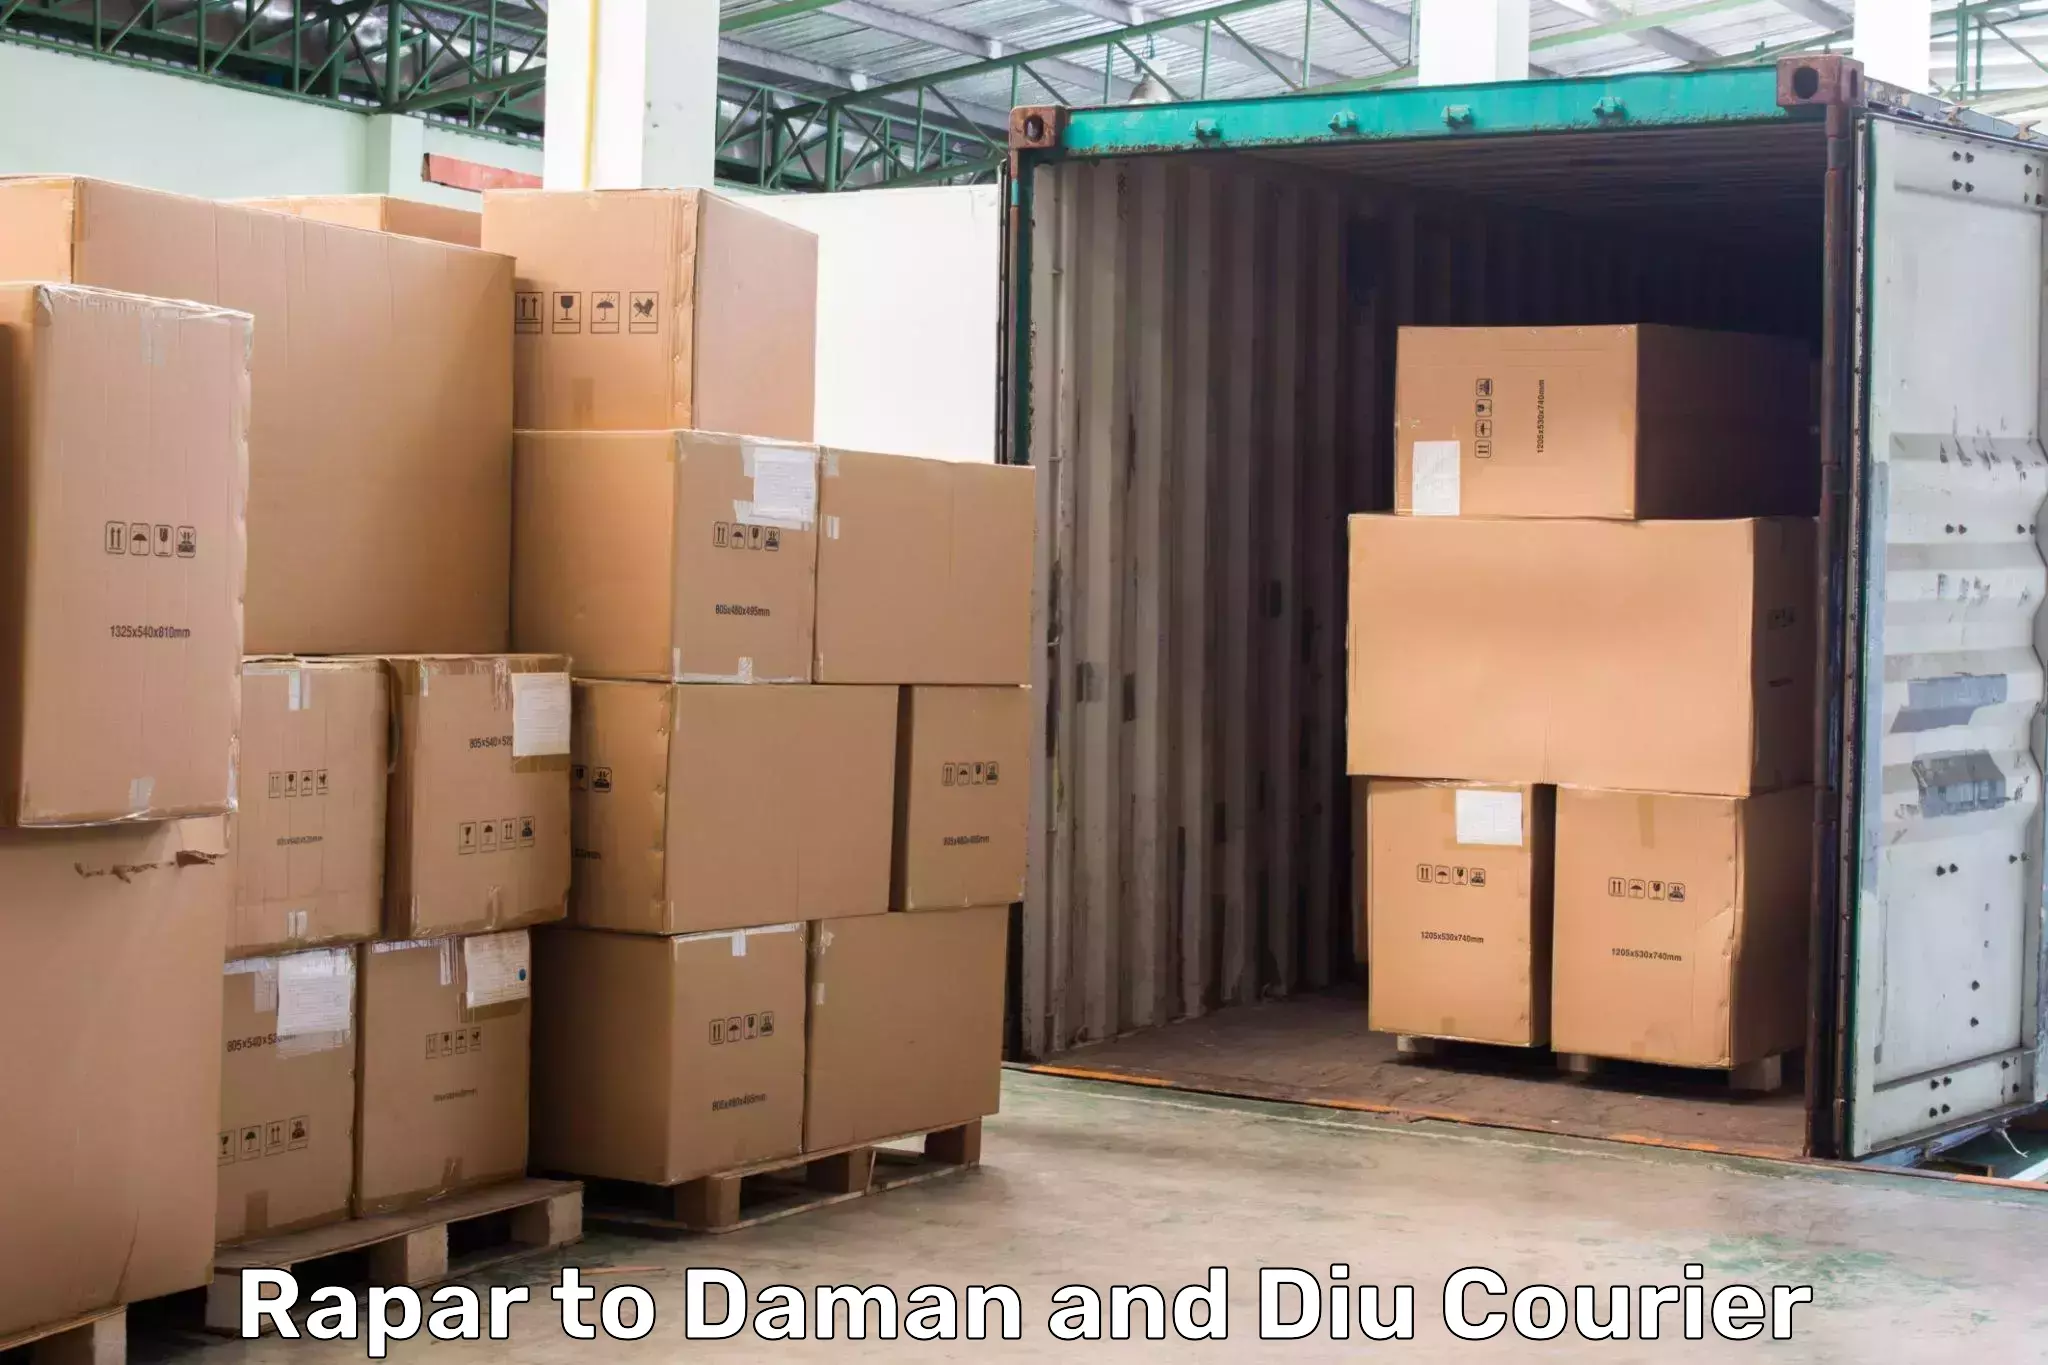 State-of-the-art courier technology Rapar to Daman and Diu